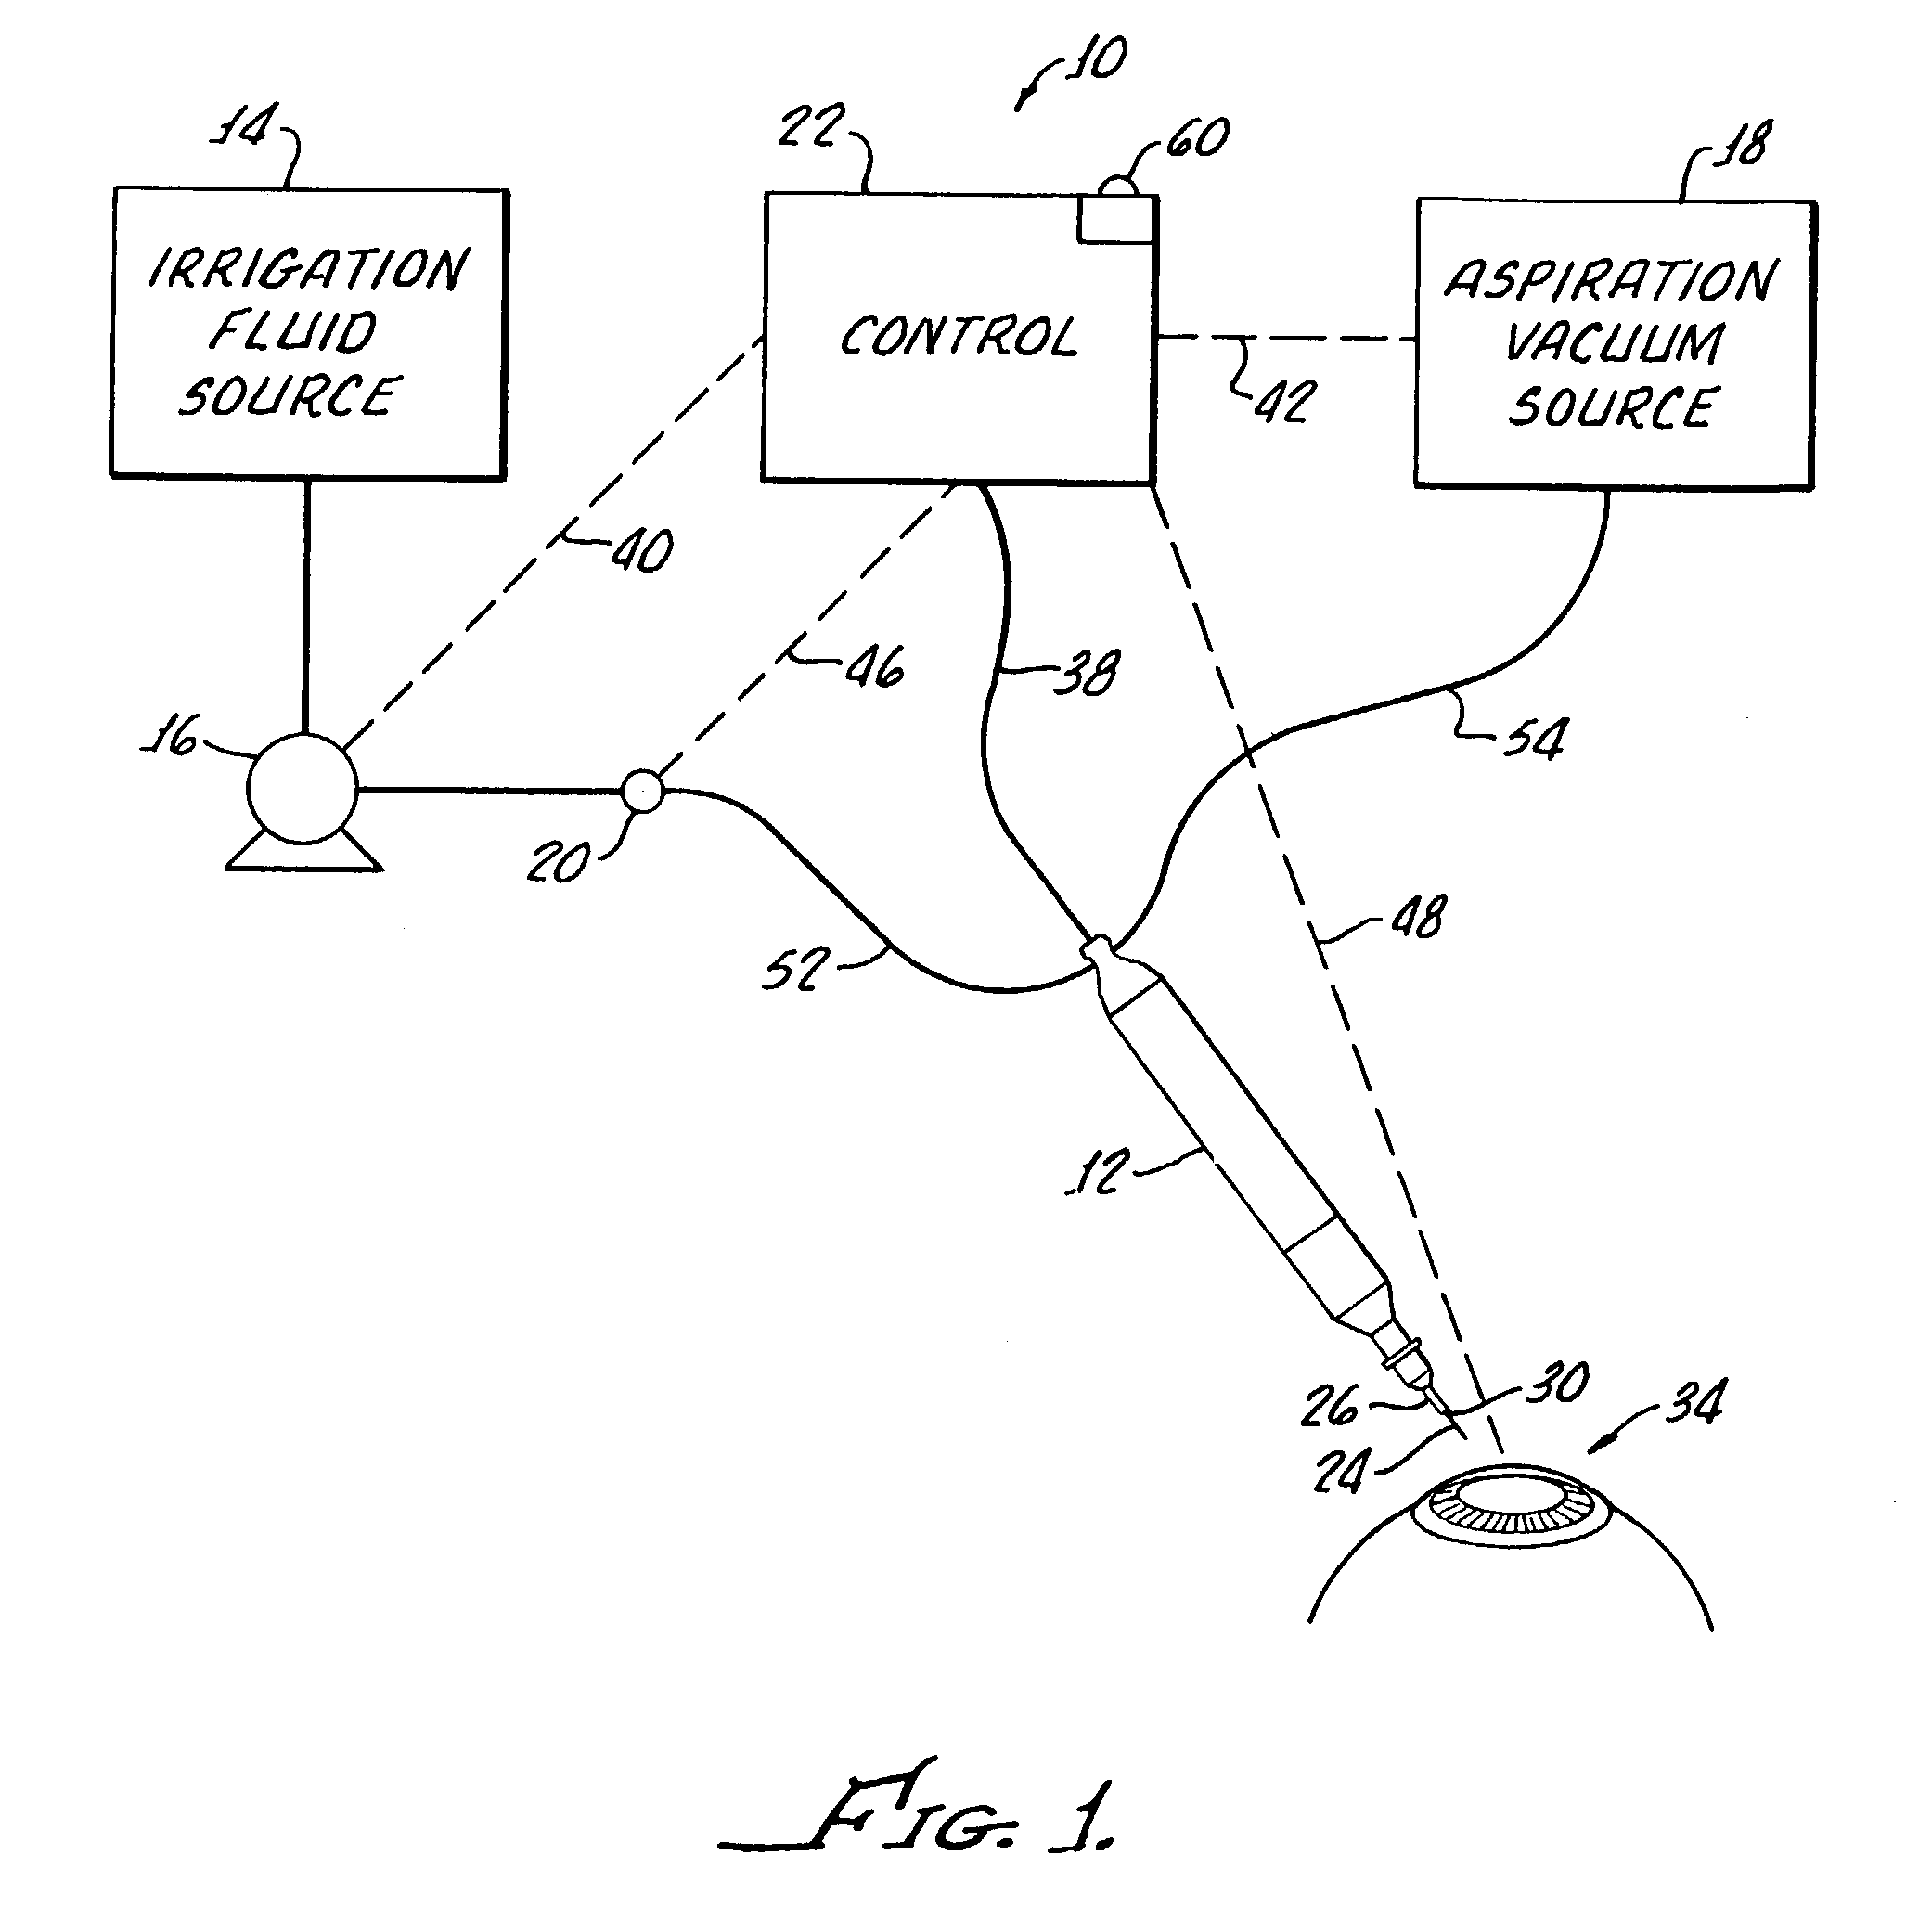 Method for controlling fluid flow to and from an eye during ophthalmic surgery